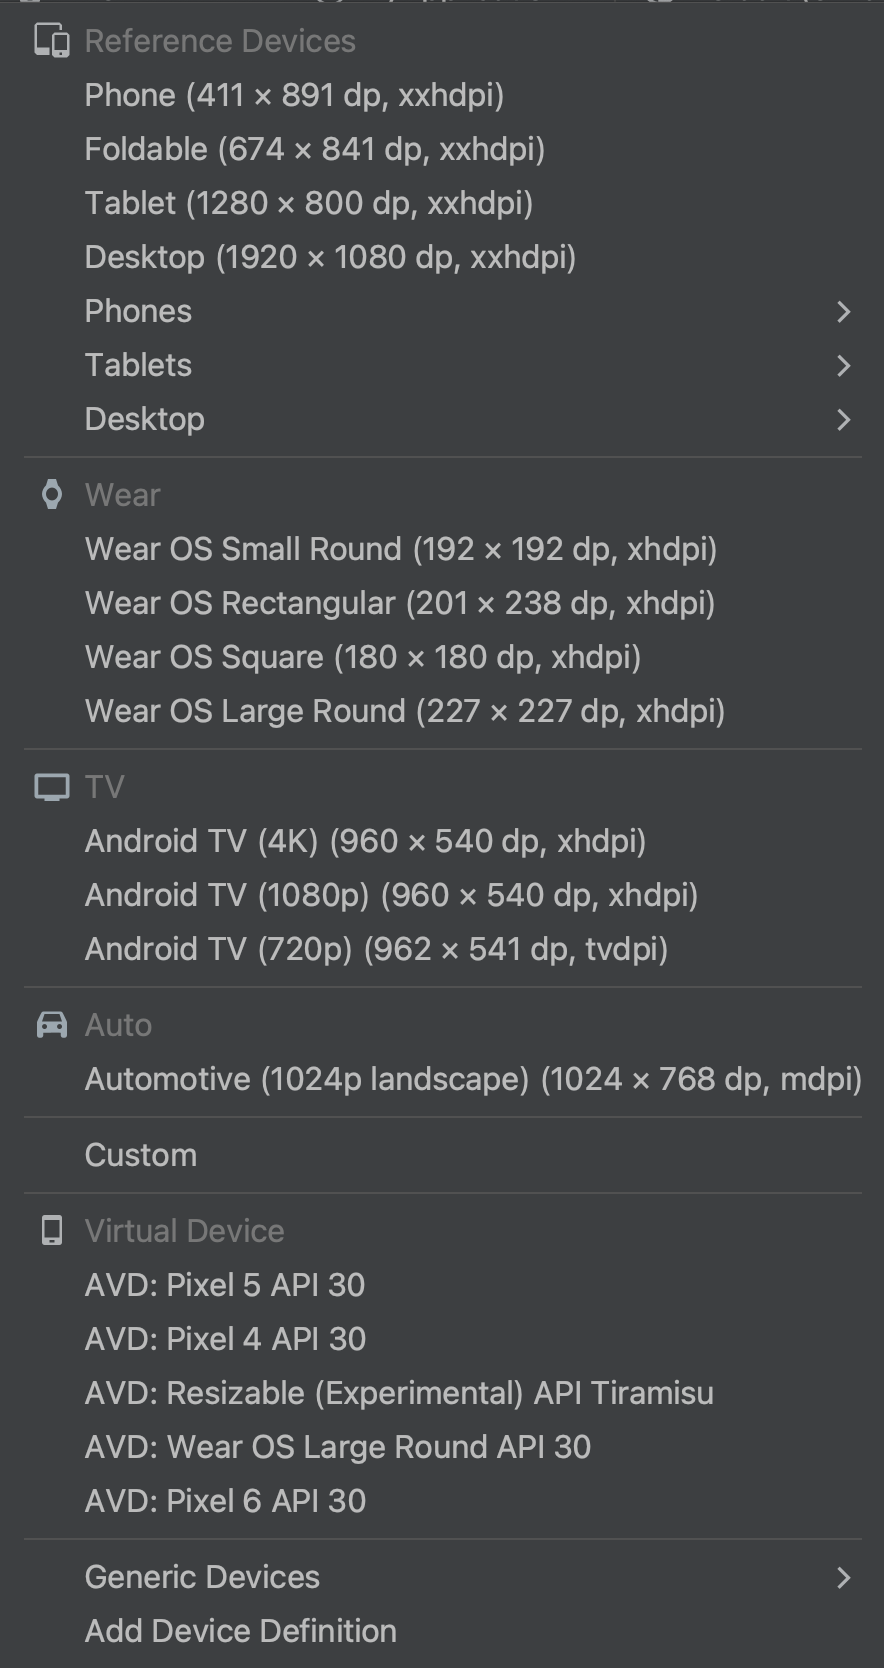 Device picker with devices and their size and density, grouped by class